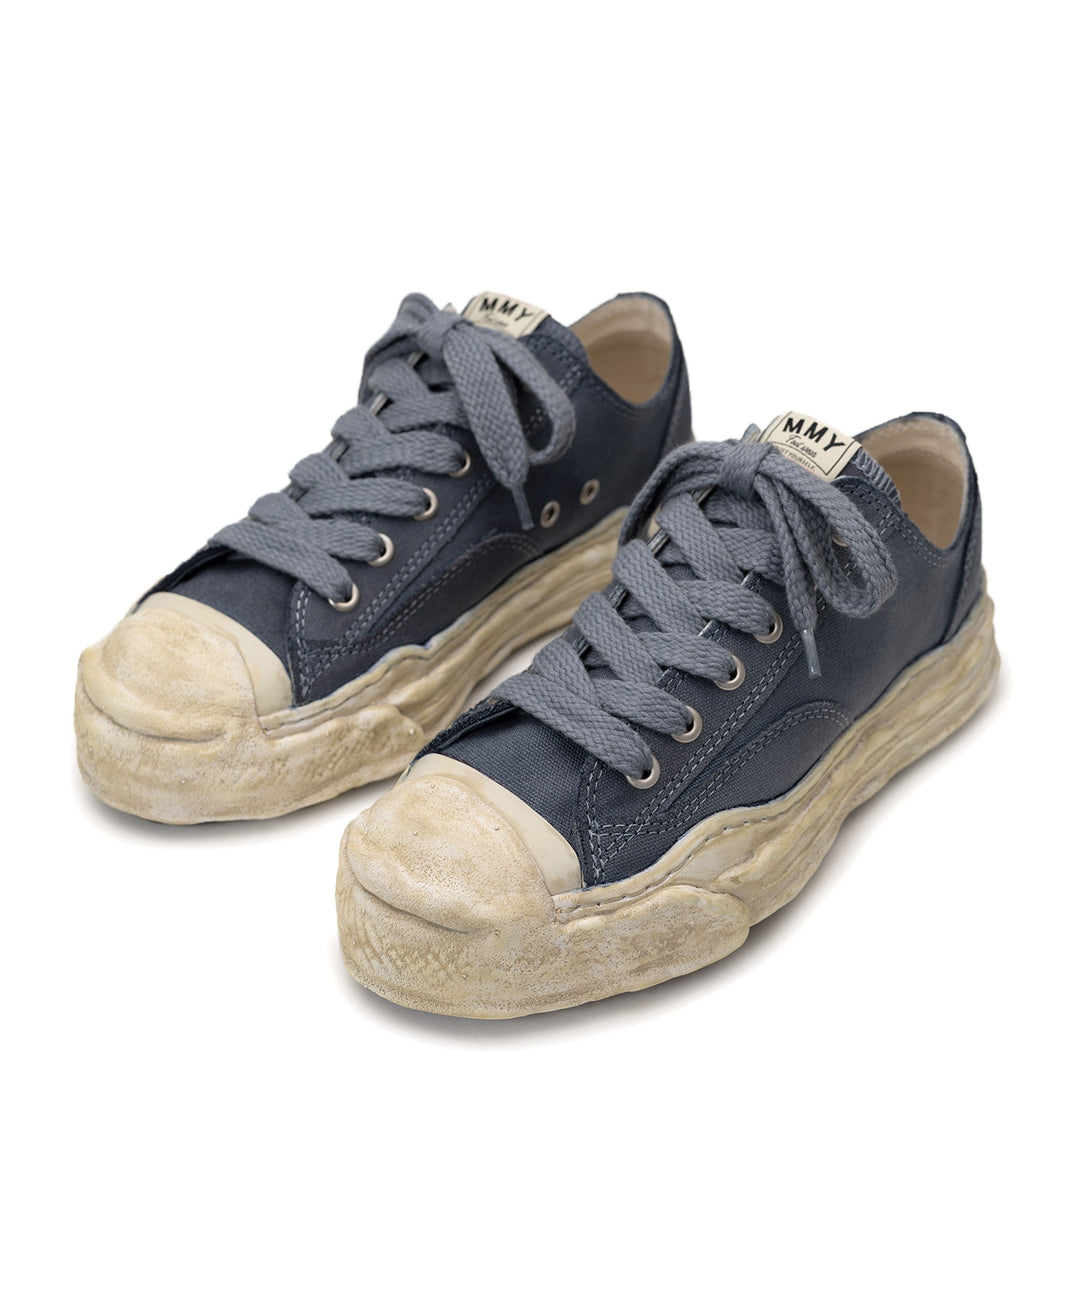 "HANK" OG Sole Over-dyed Canvas Low-top Sneaker